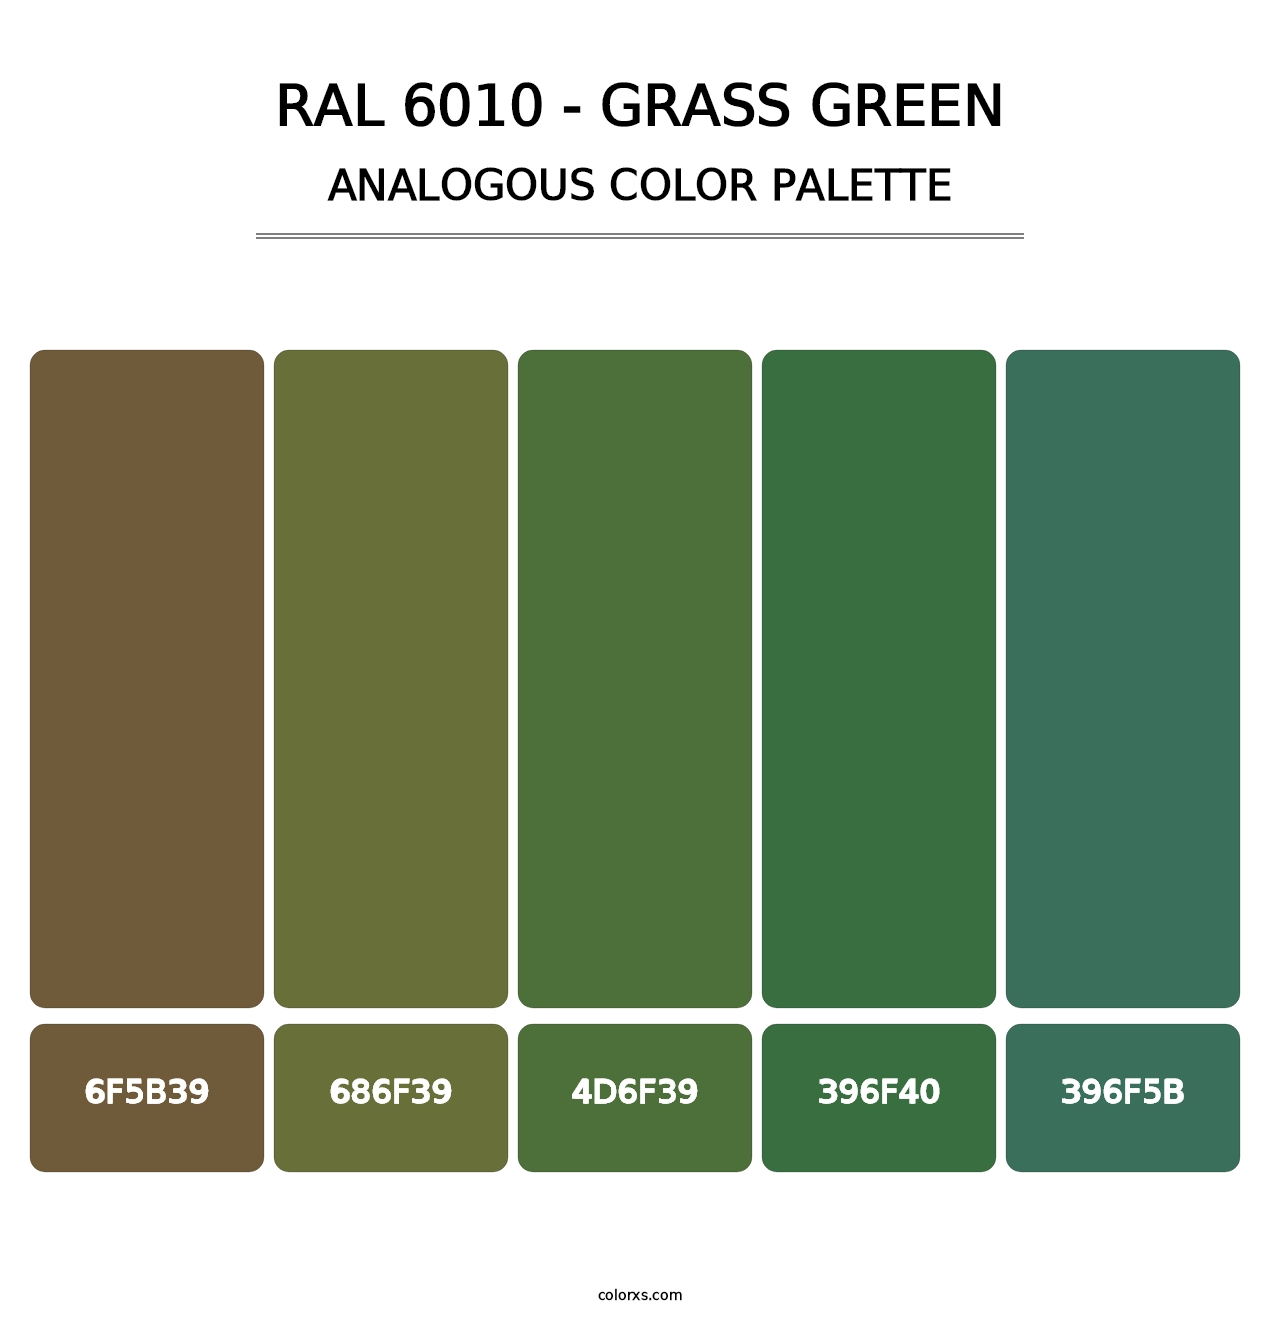 RAL 6010 - Grass Green - Analogous Color Palette